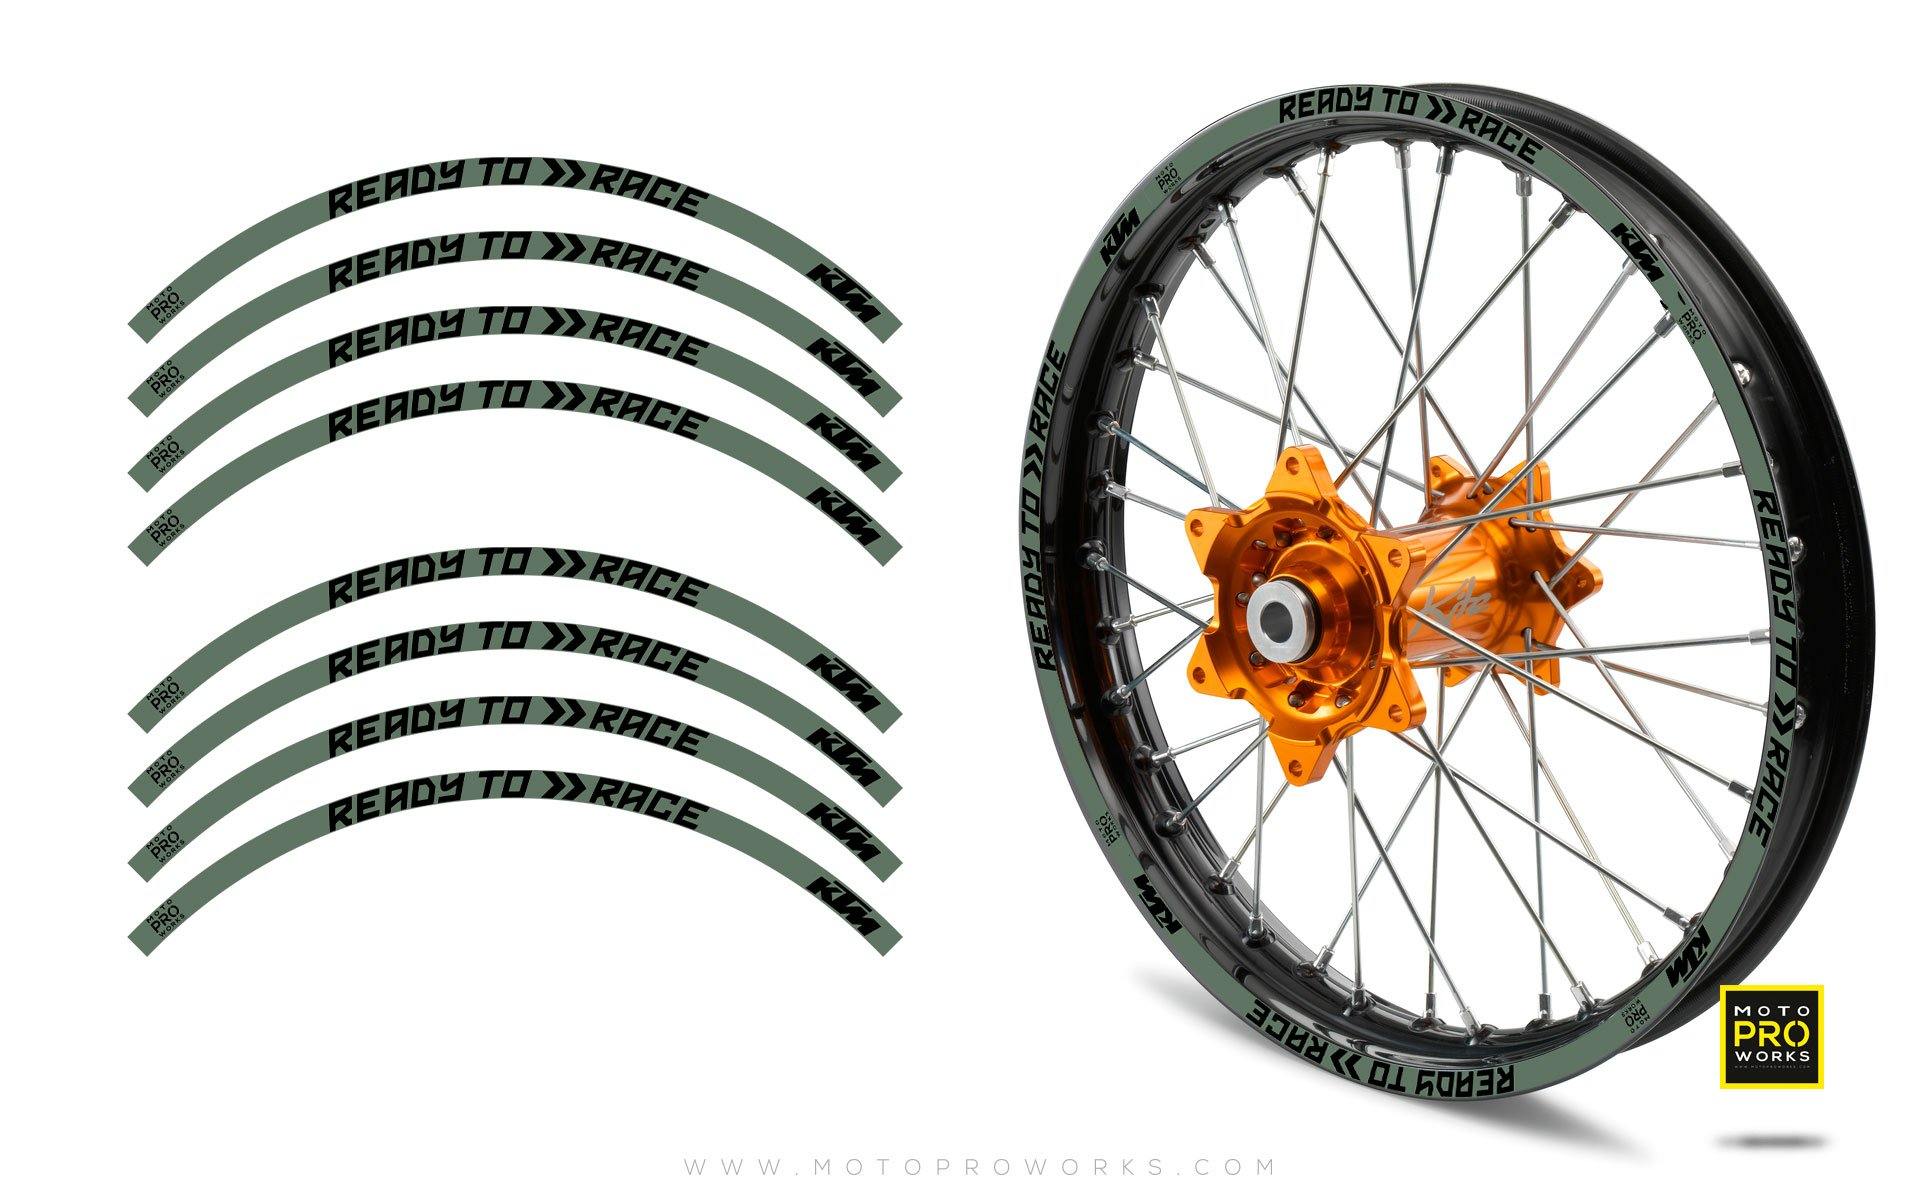 Rim Stripes - KTM "Ready To Race" (Moss) - MotoProWorks | Decals and Bike Graphic kit